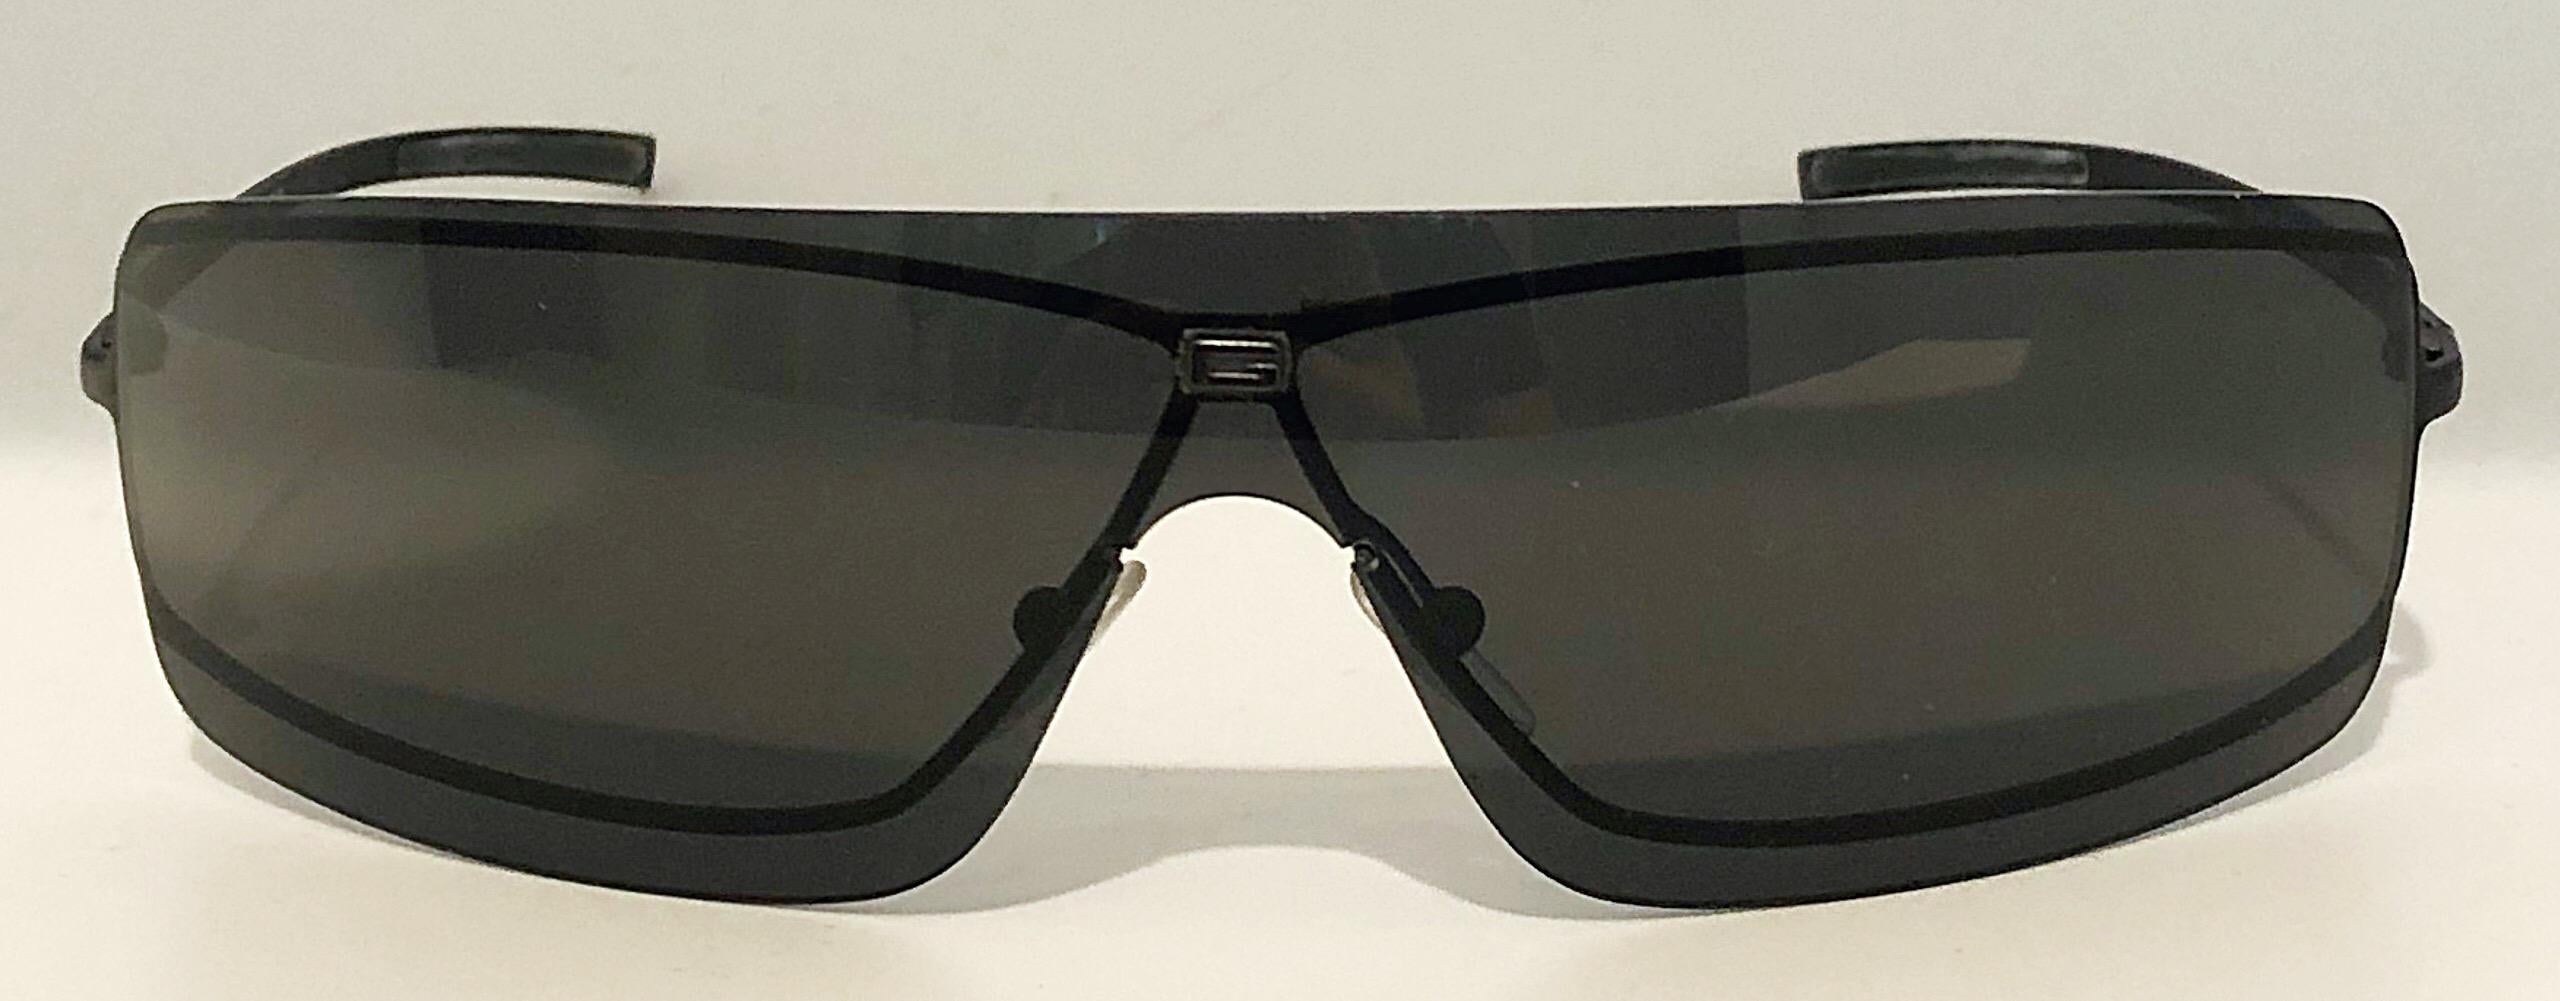 Gucci by Tom Ford Matrix Black Grey Rimless Unisex 1990s Vintage 90s Sunglasses For Sale 3